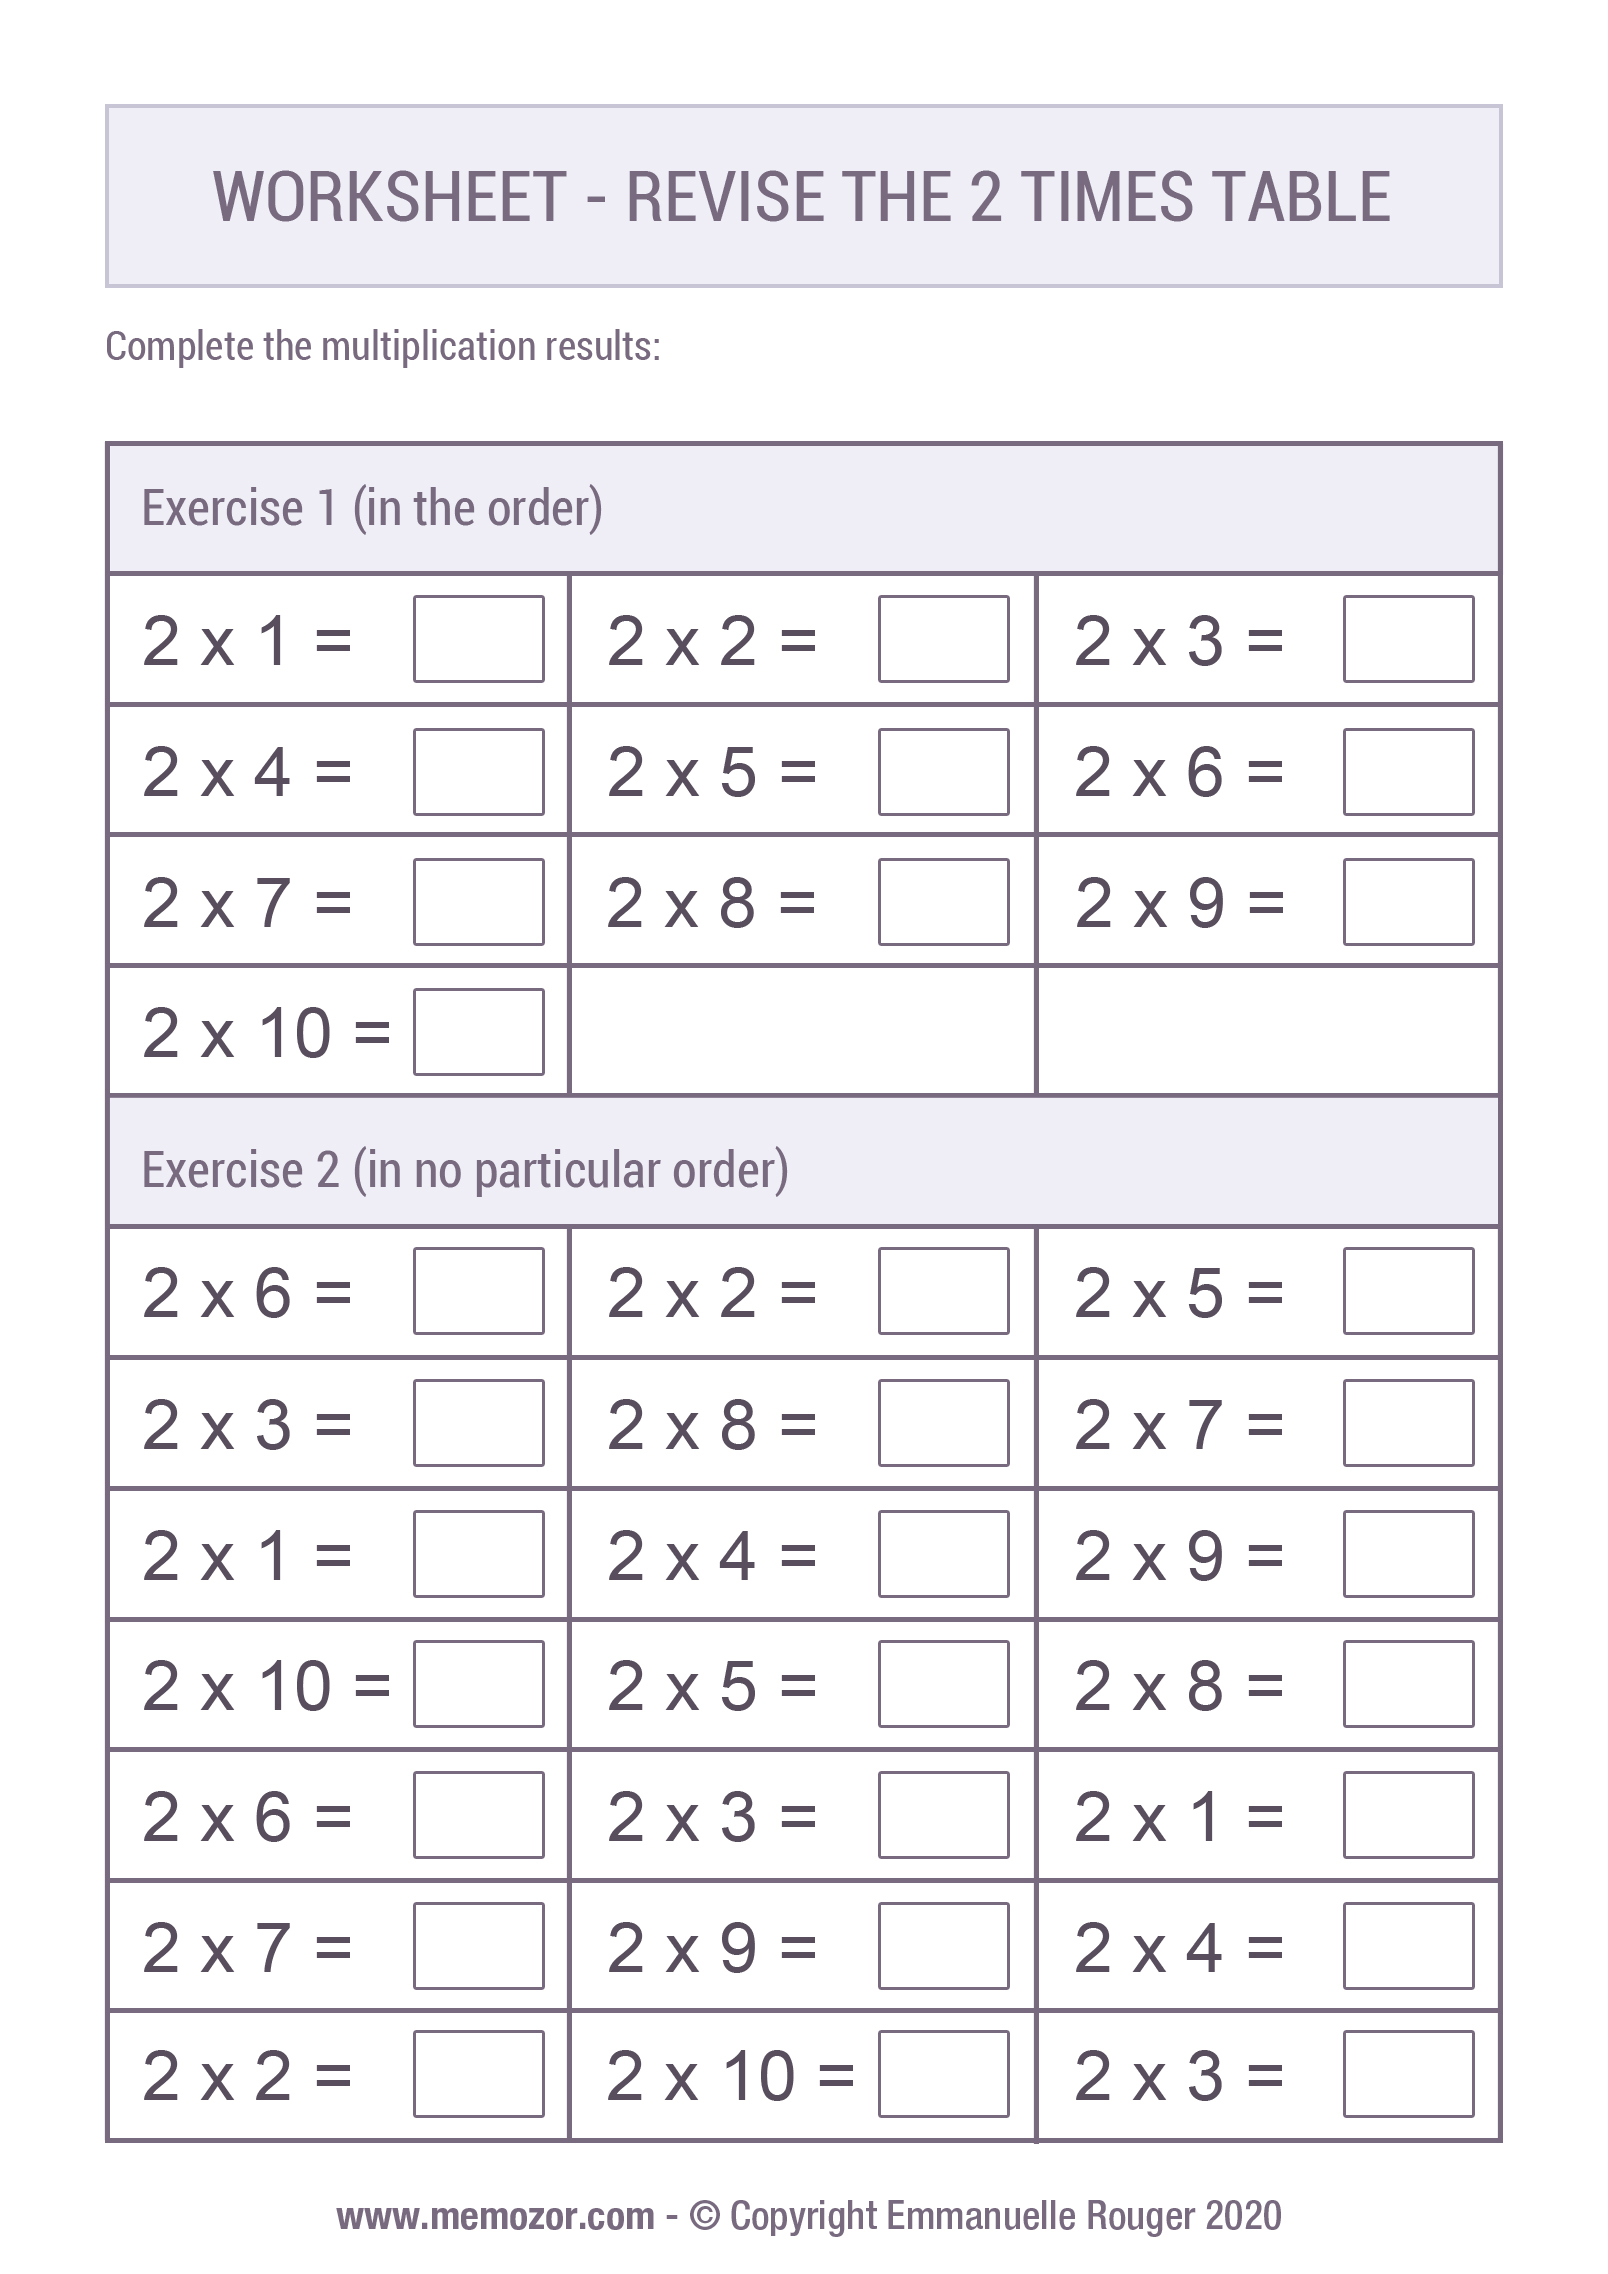 Printable Worksheet - Revise the 20 Times table  Memozor With Regard To 2 Times Table Worksheet